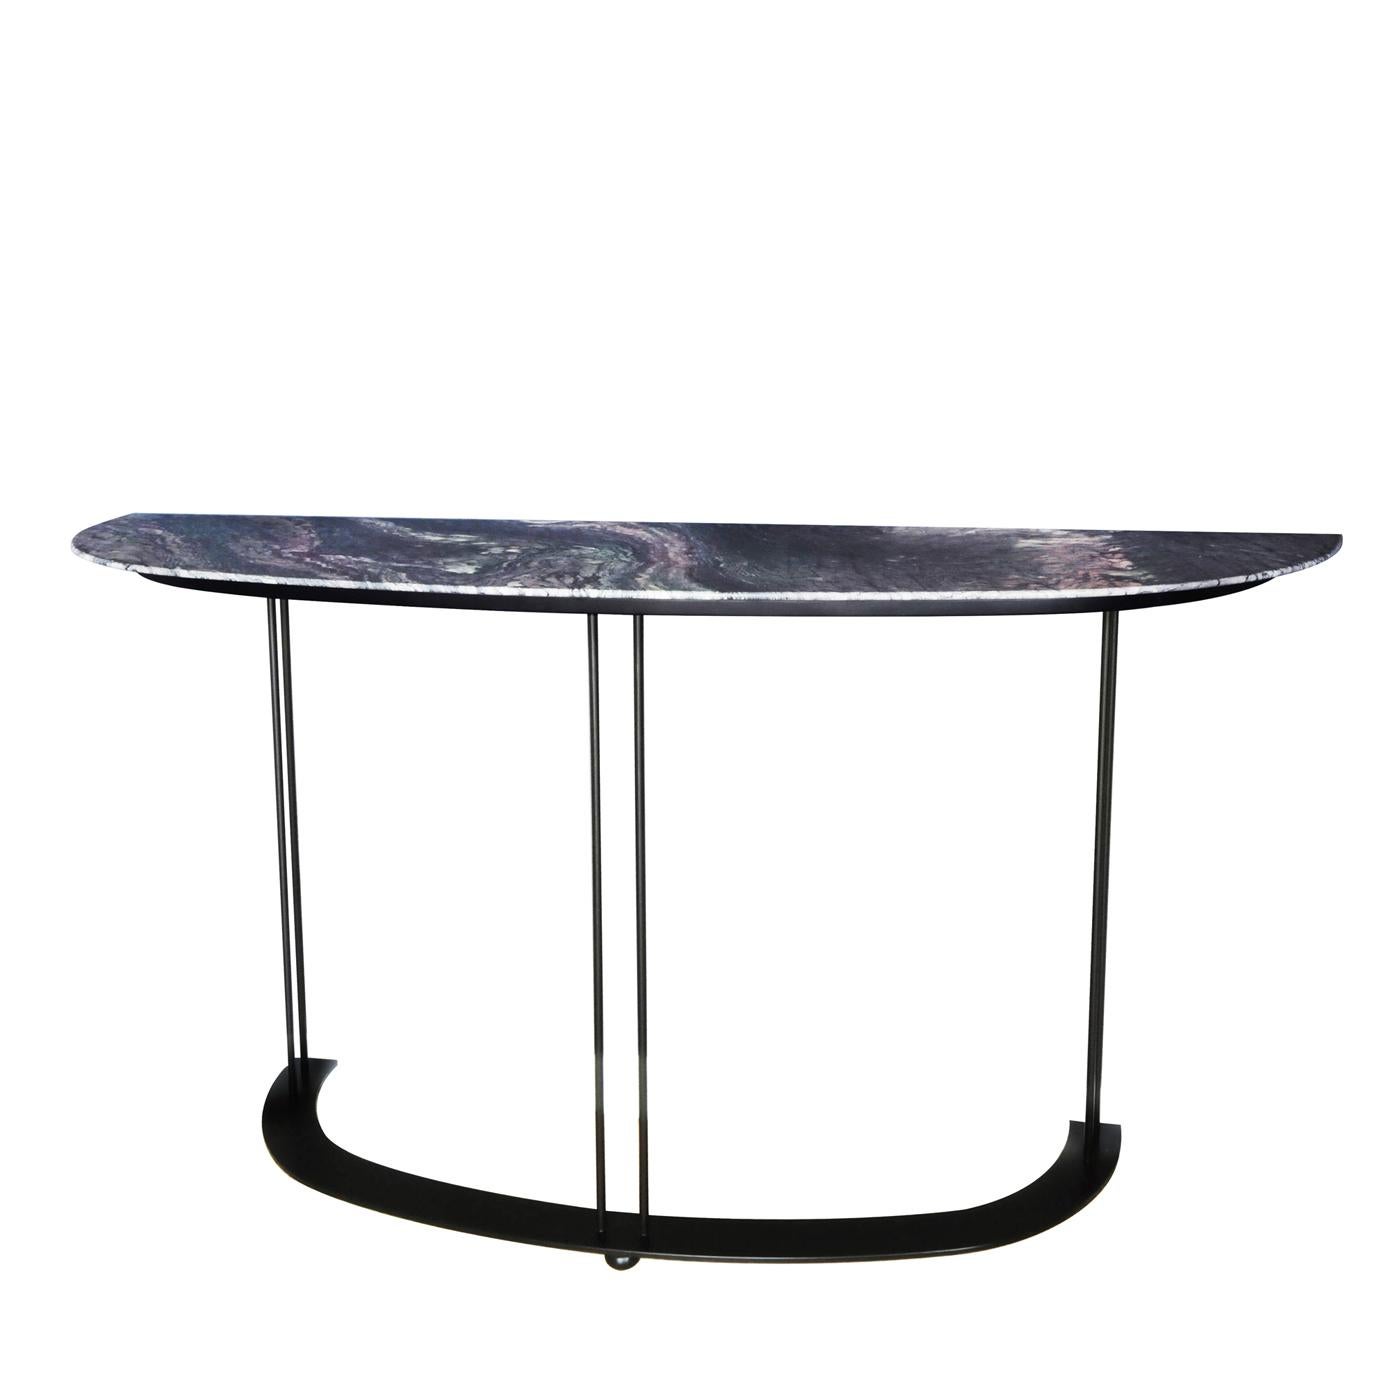 A striking piece of functional decor, this console will elevate the look of an interior. It boasts a magnificent top with a demilune shape, crafted of Red Luana marble showcasing natural veins and hues, and elegantly resting on a metal base with a